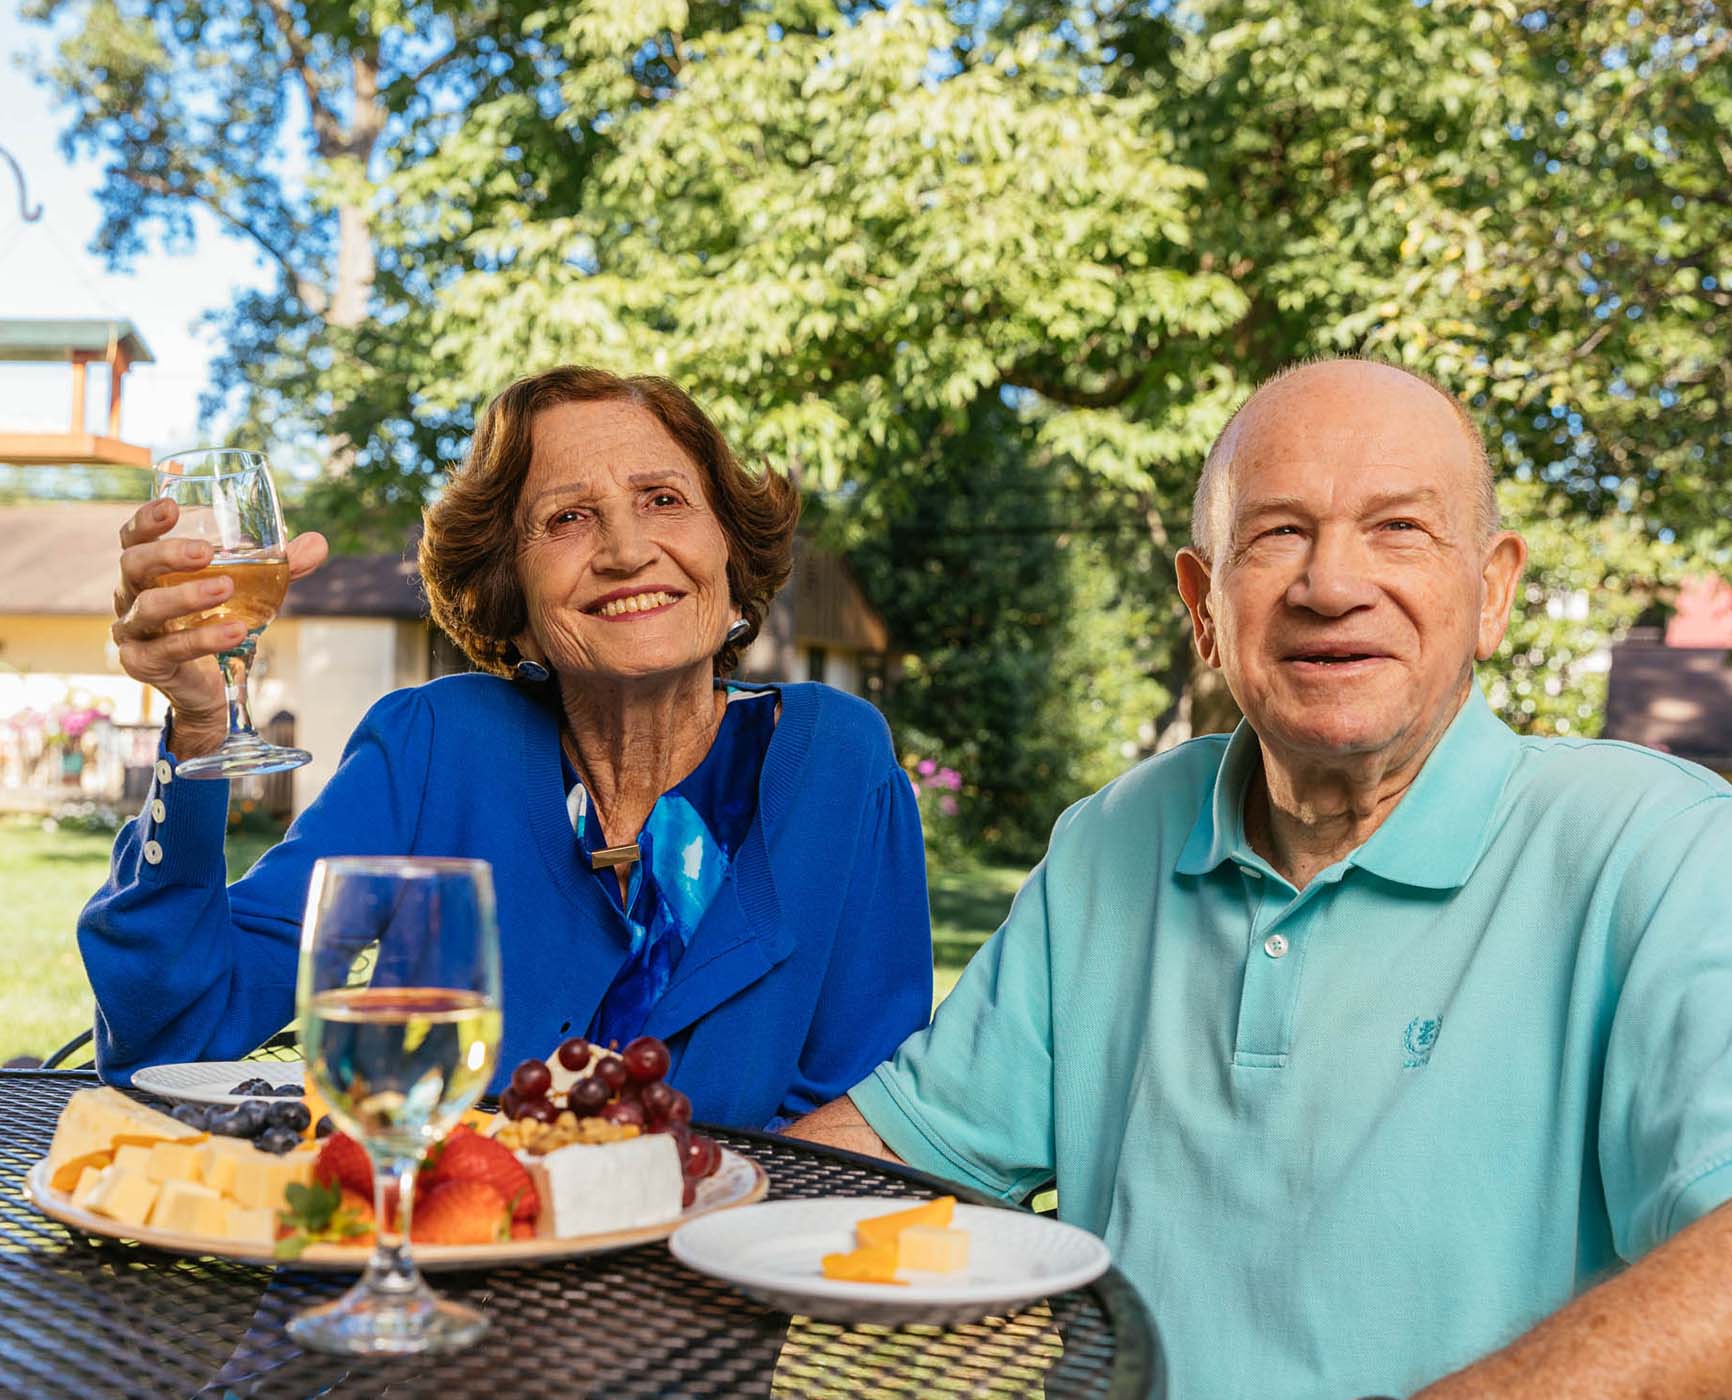 Senior couple enjoying wine and cheese on an outdoor patio